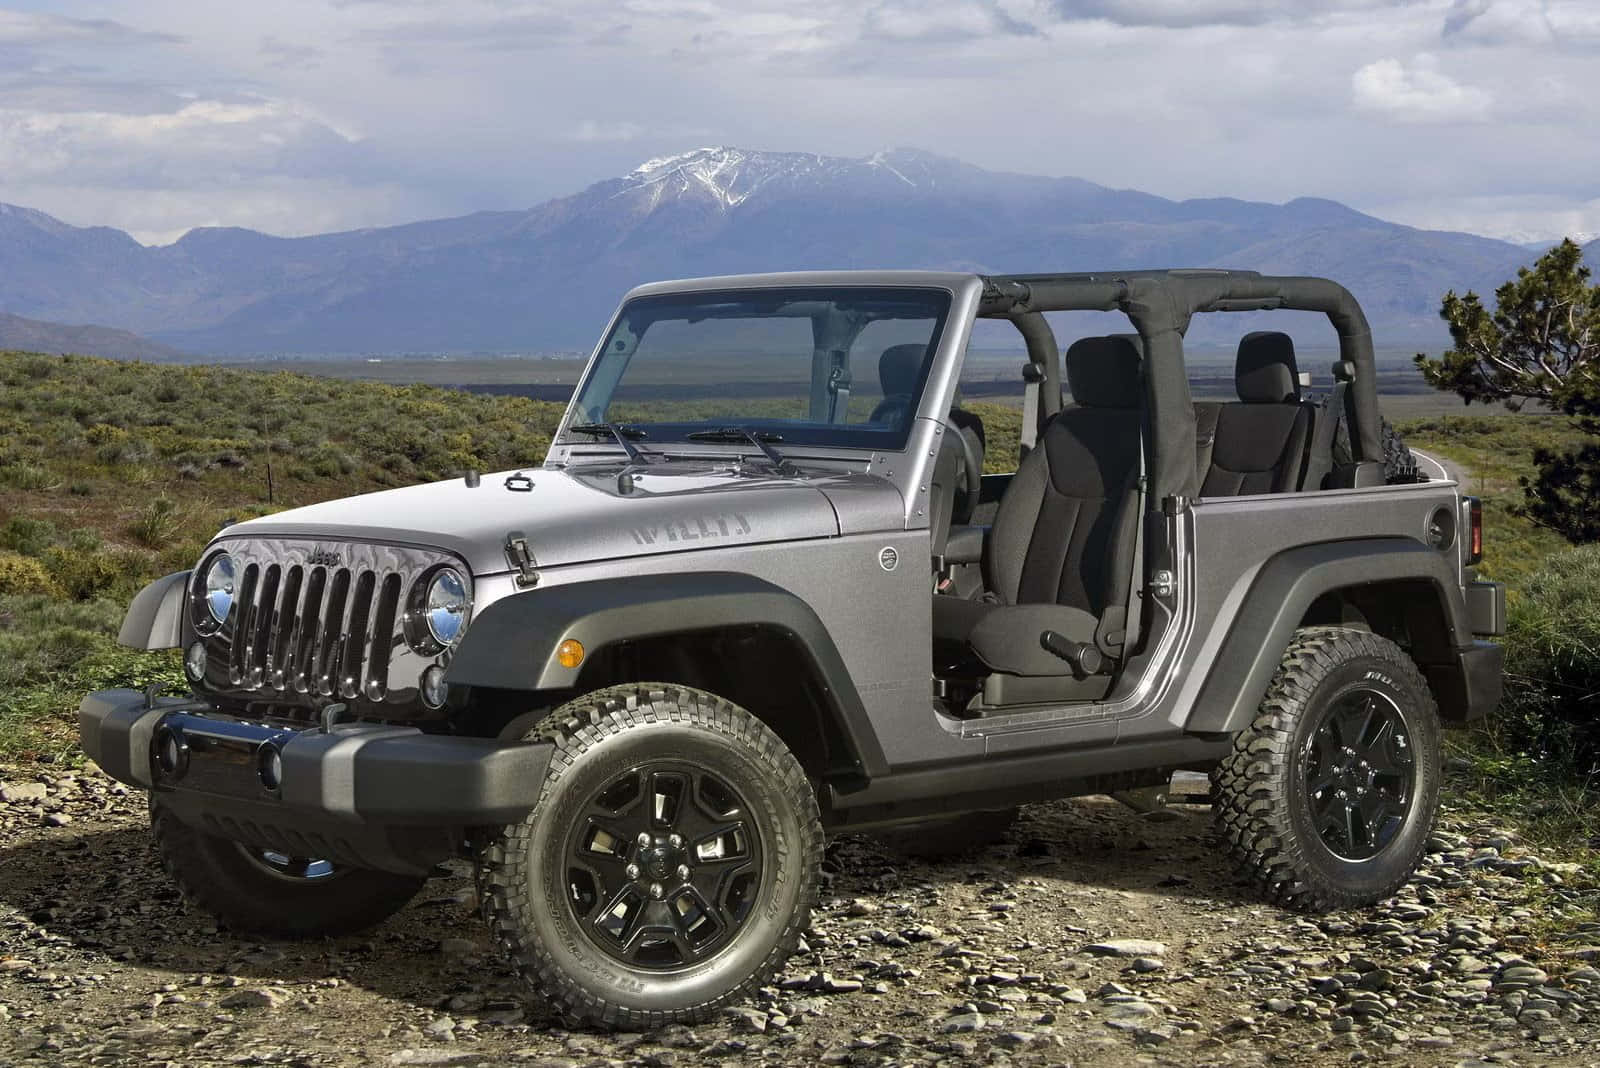 The 2014 Jeep Wrangler Is Parked On A Rocky Mountain